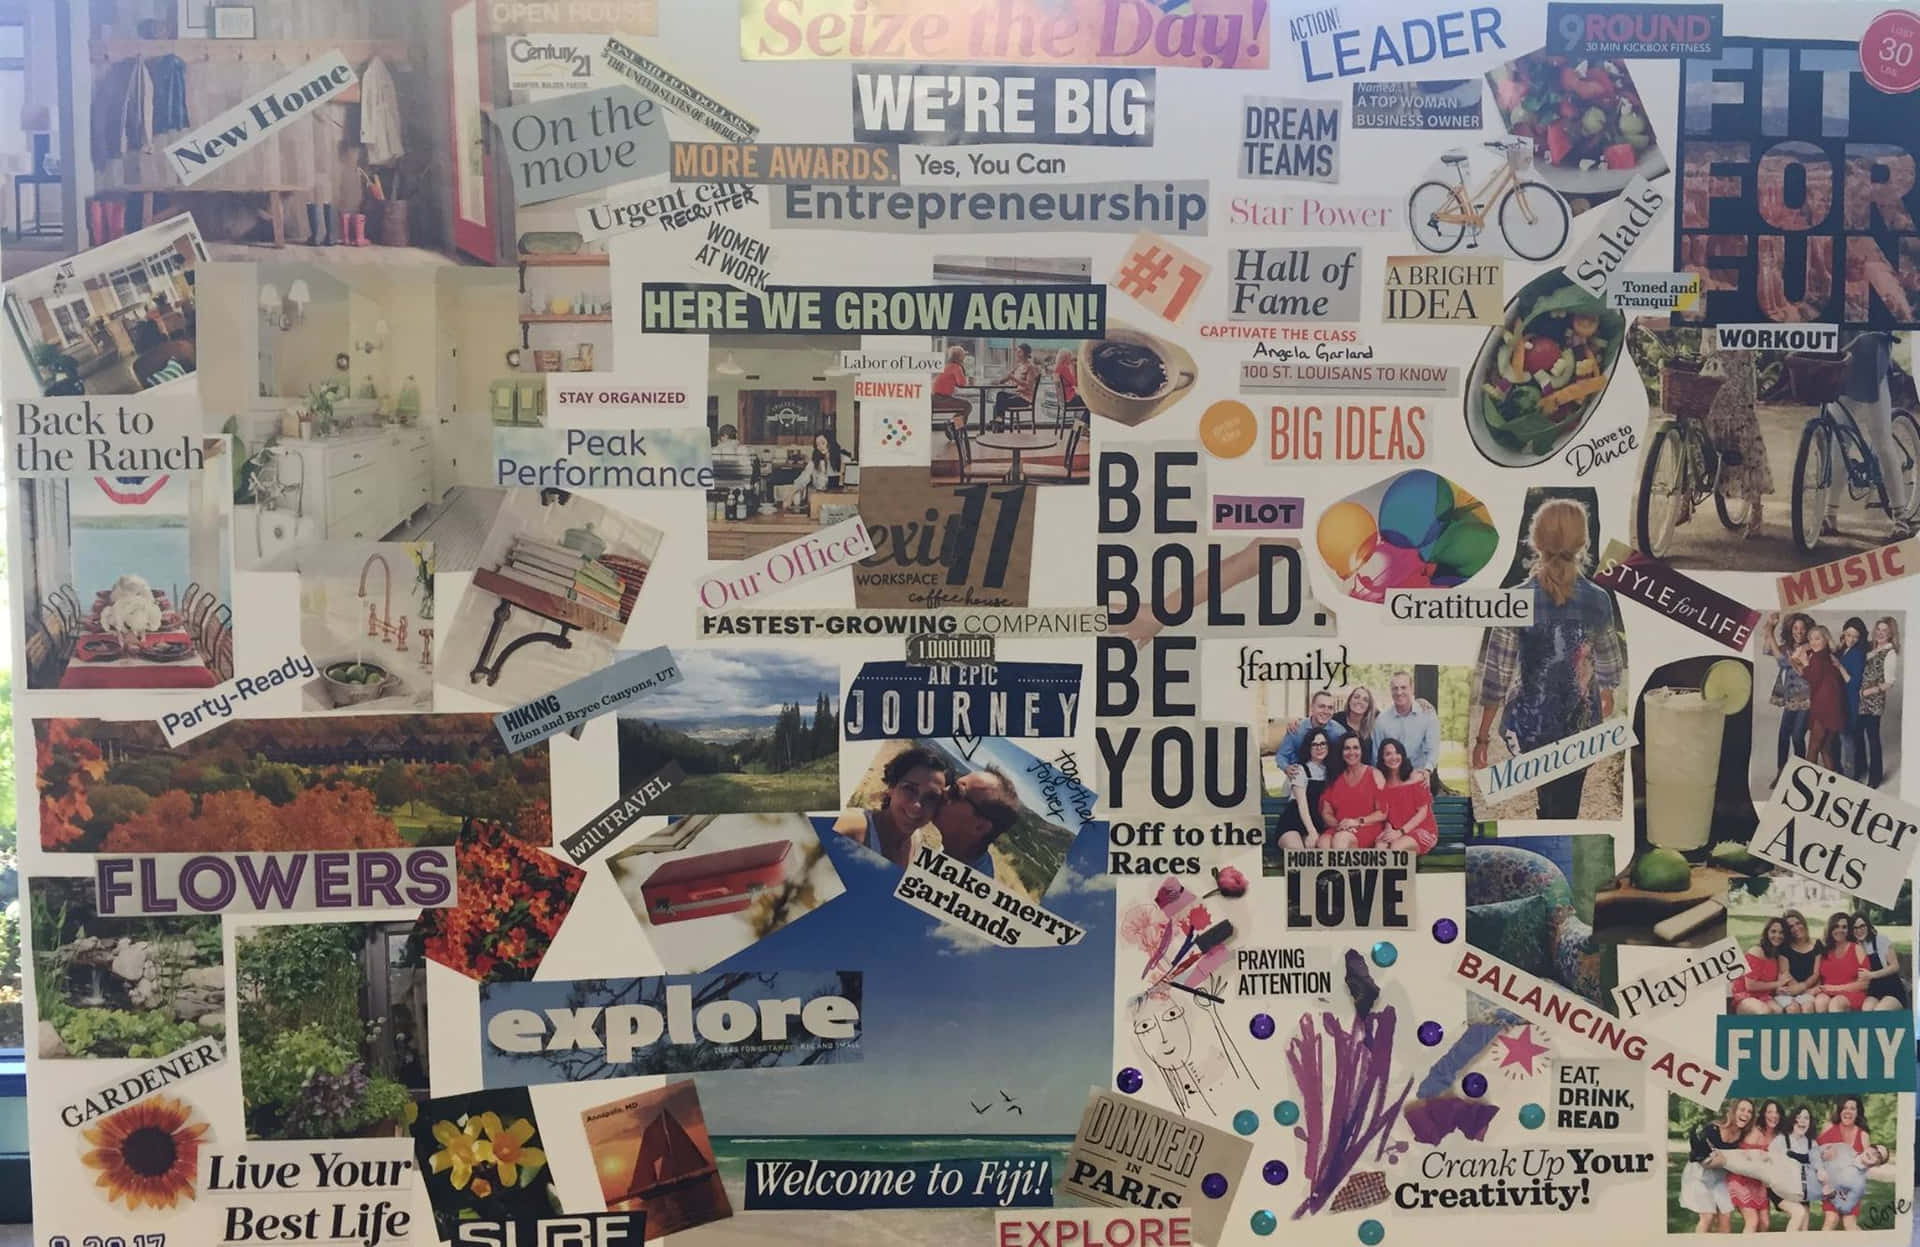 A Collage Of Pictures And Words On A Wall